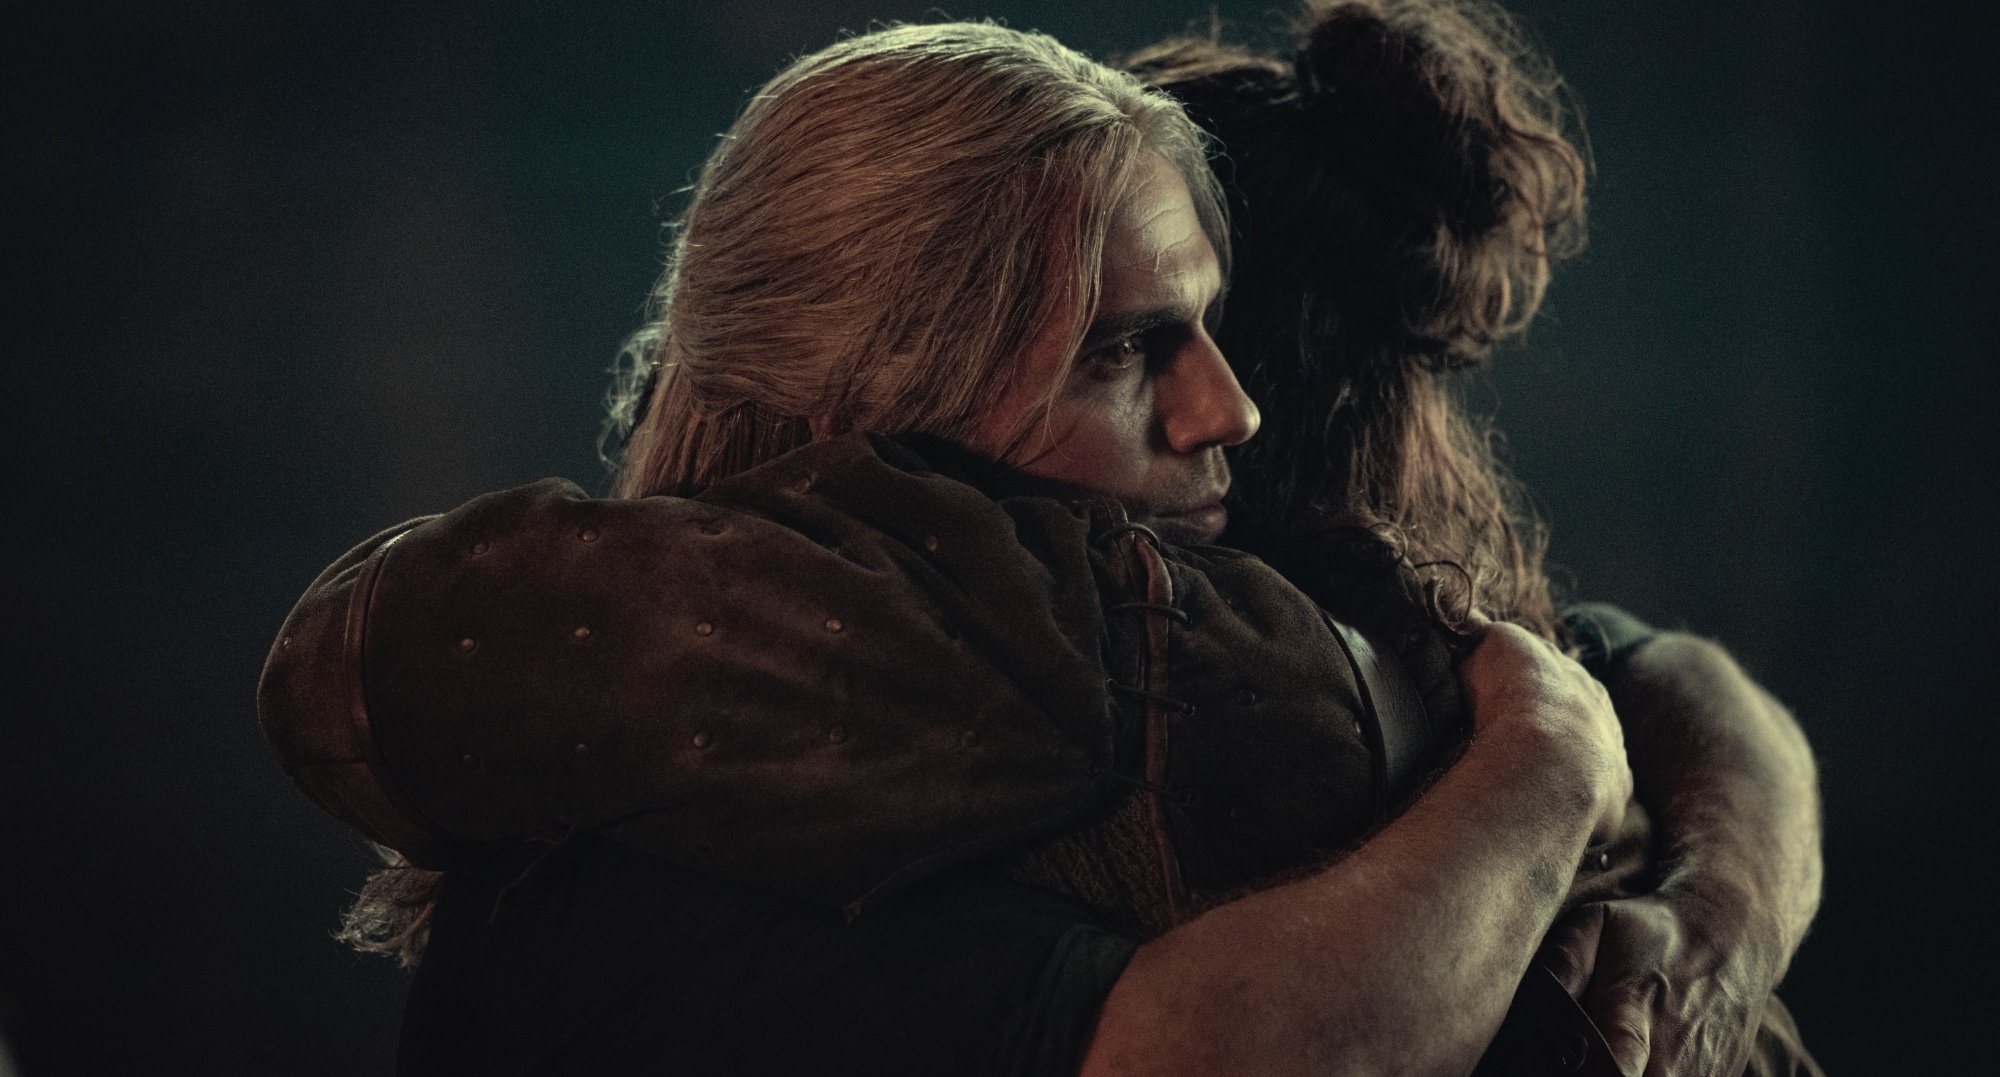 Henry Cavill as Geralt hugging Eskel in 'The Witcher' Season 2.